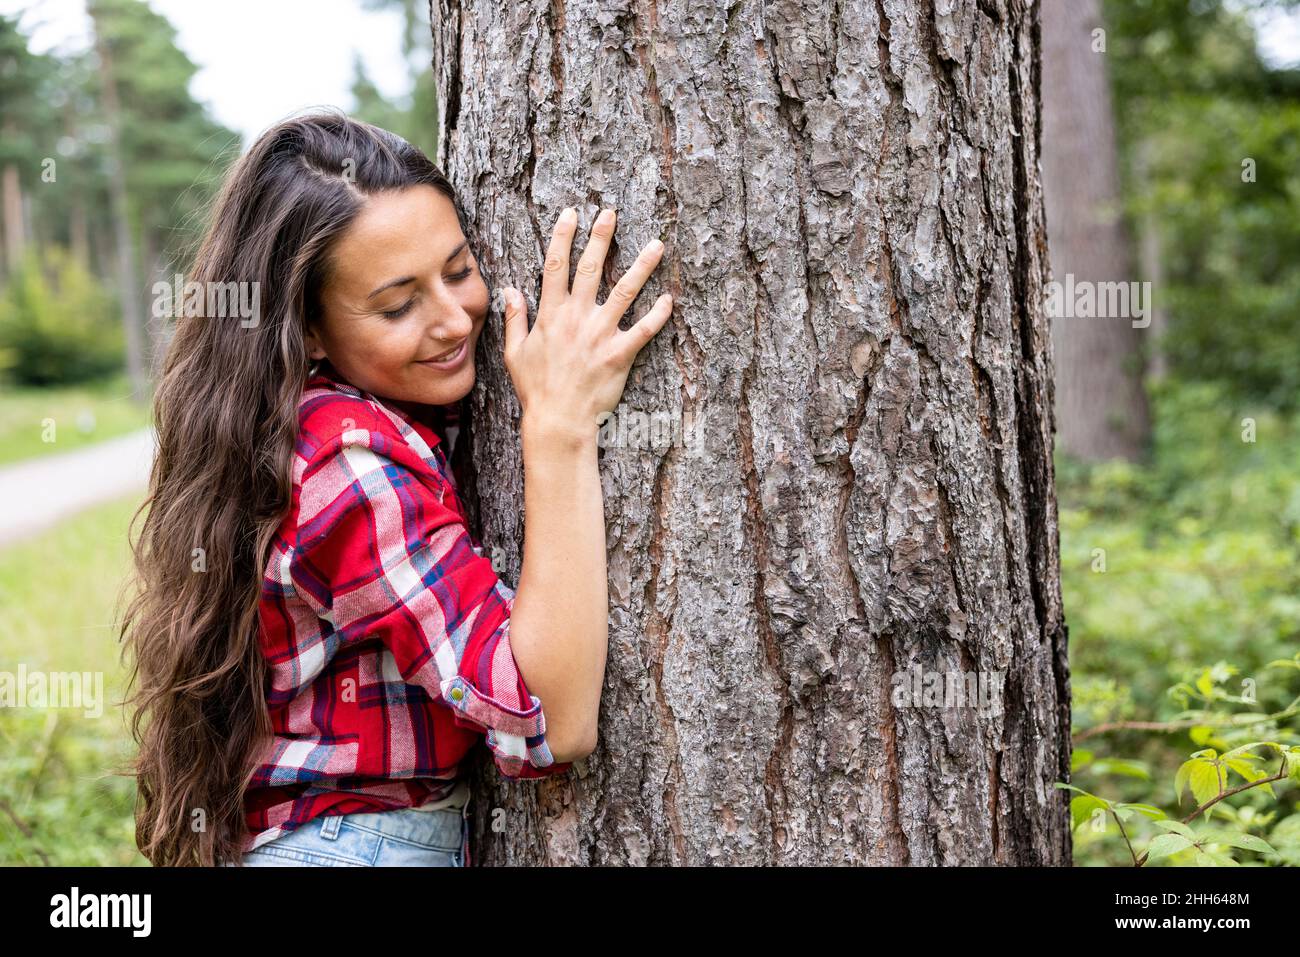 Smiling woman embracing tree at Cannock Chase Stock Photo